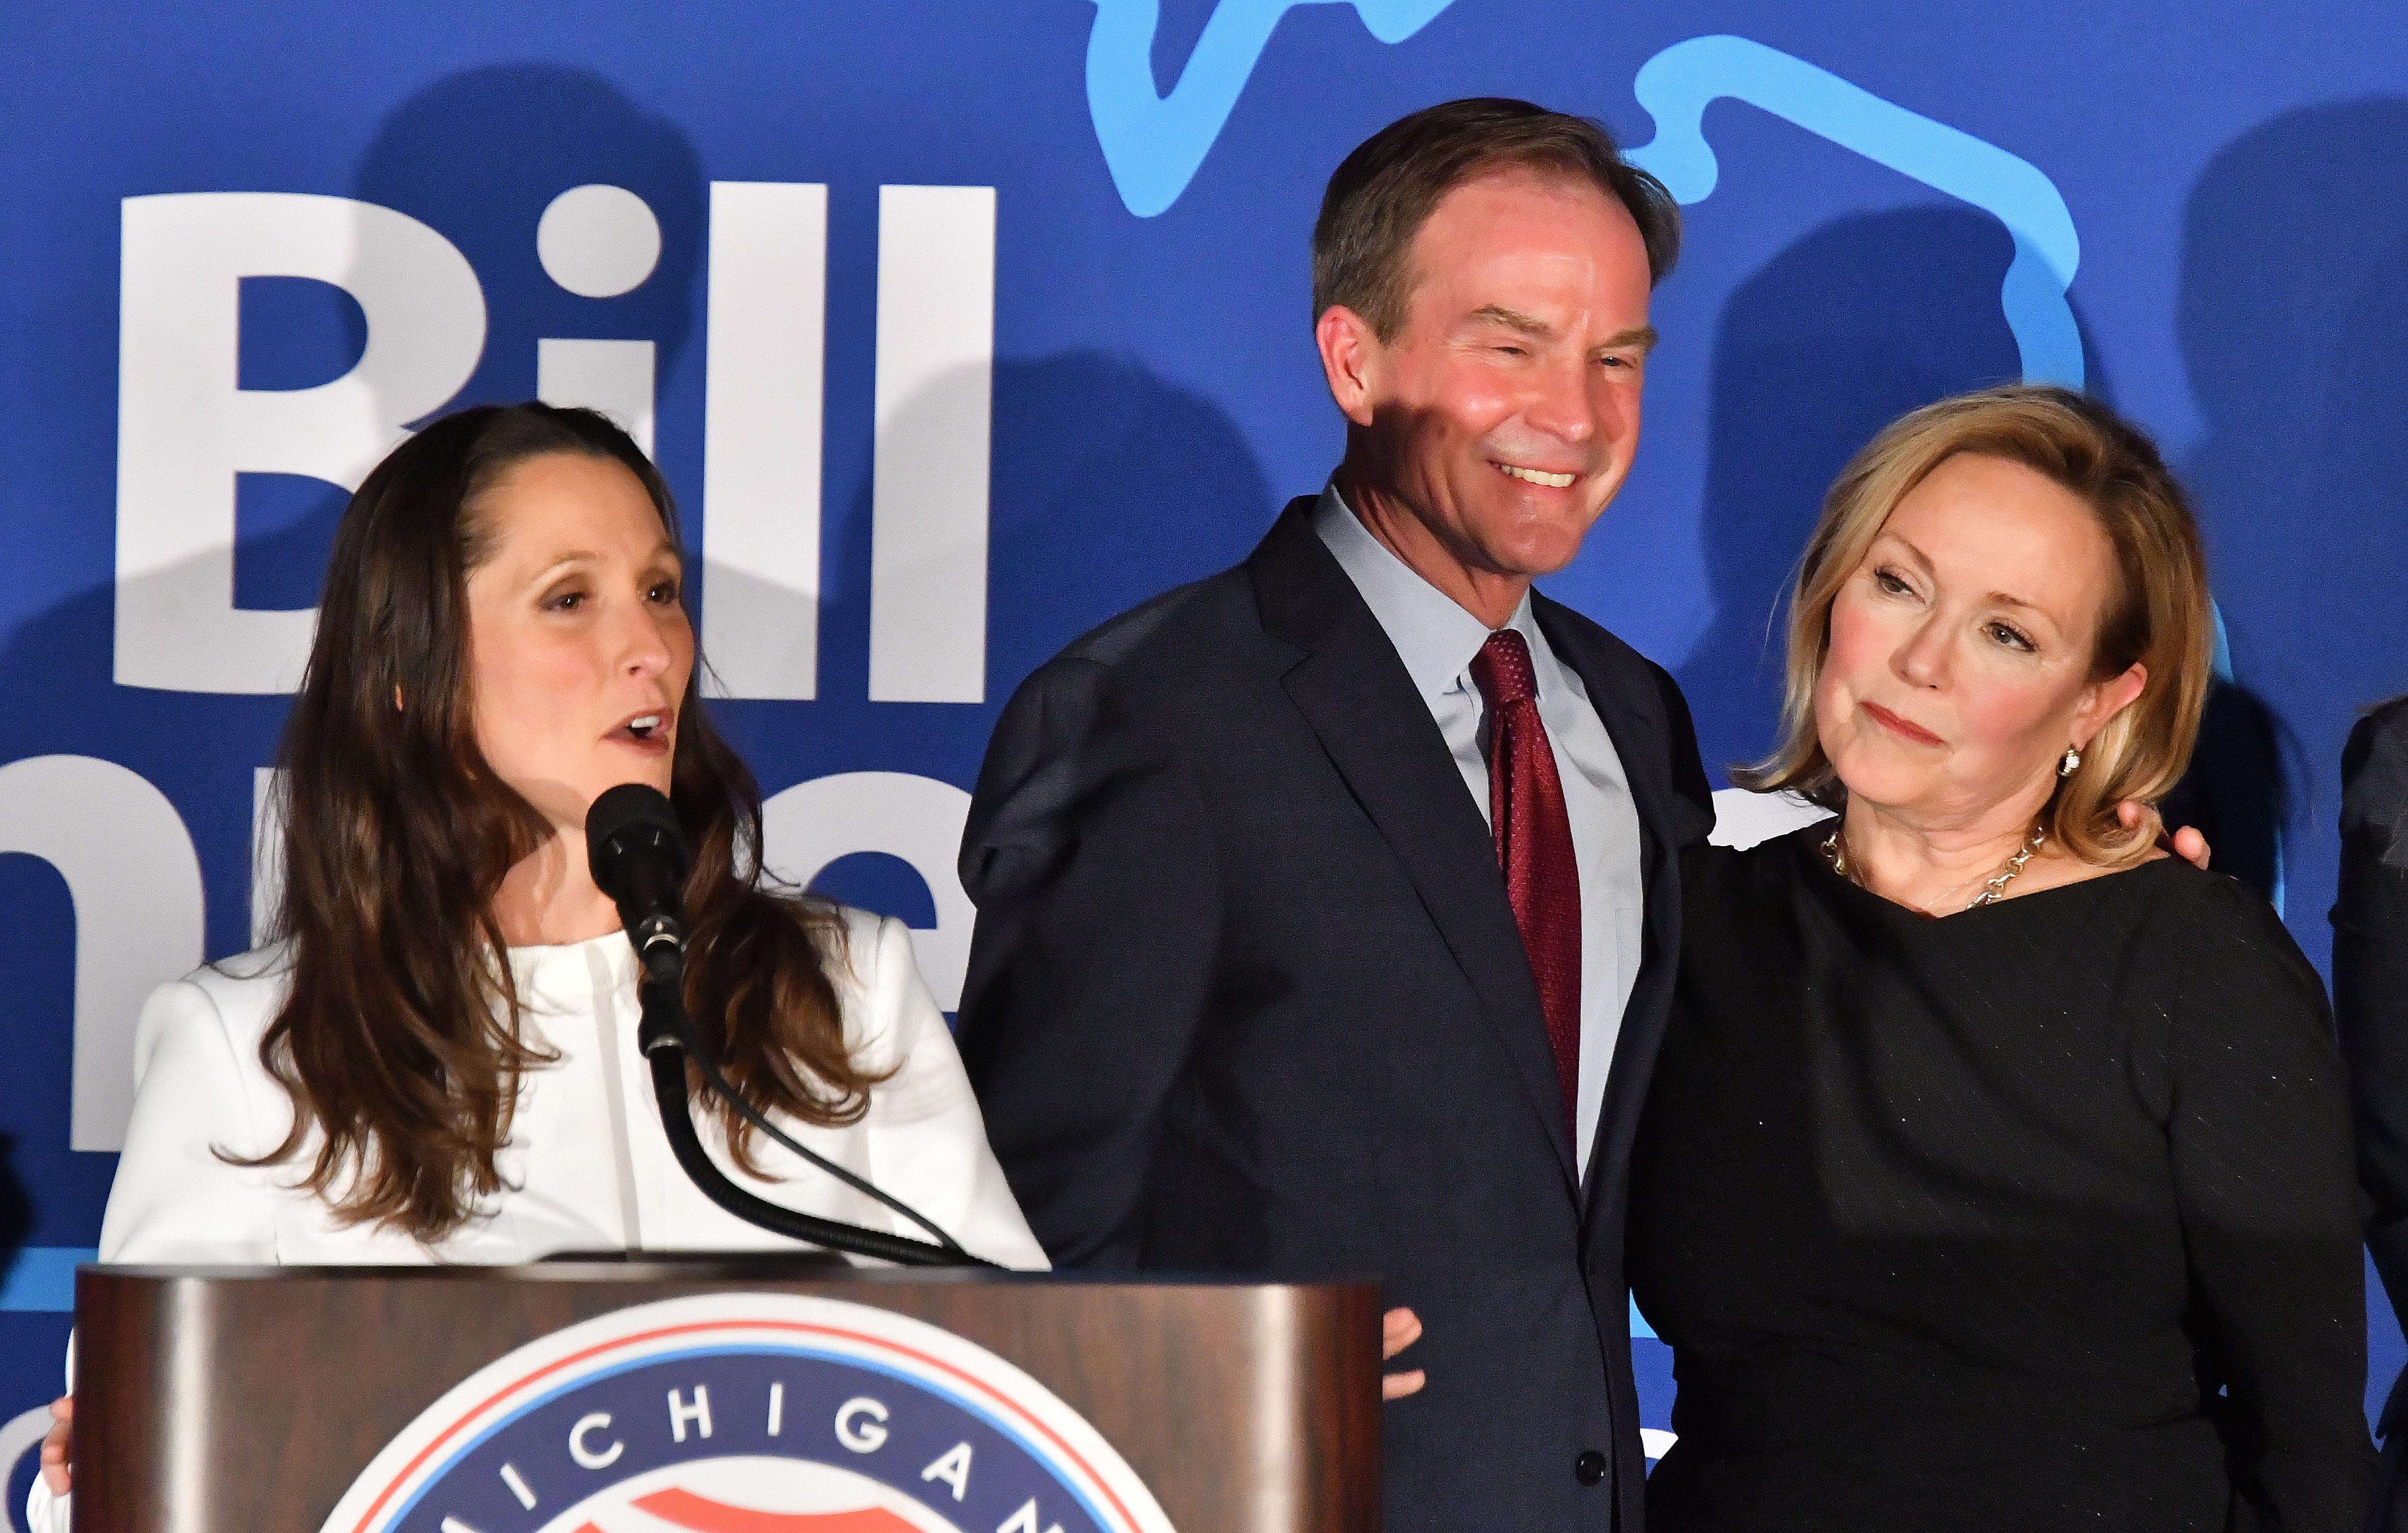 Lt. governor candidate Lisa Posthumus Lyons addresses the crowd beside running mate Bill Schuette and his wife Cynthia as the Michigan GOP gathers at the Lansing Center.